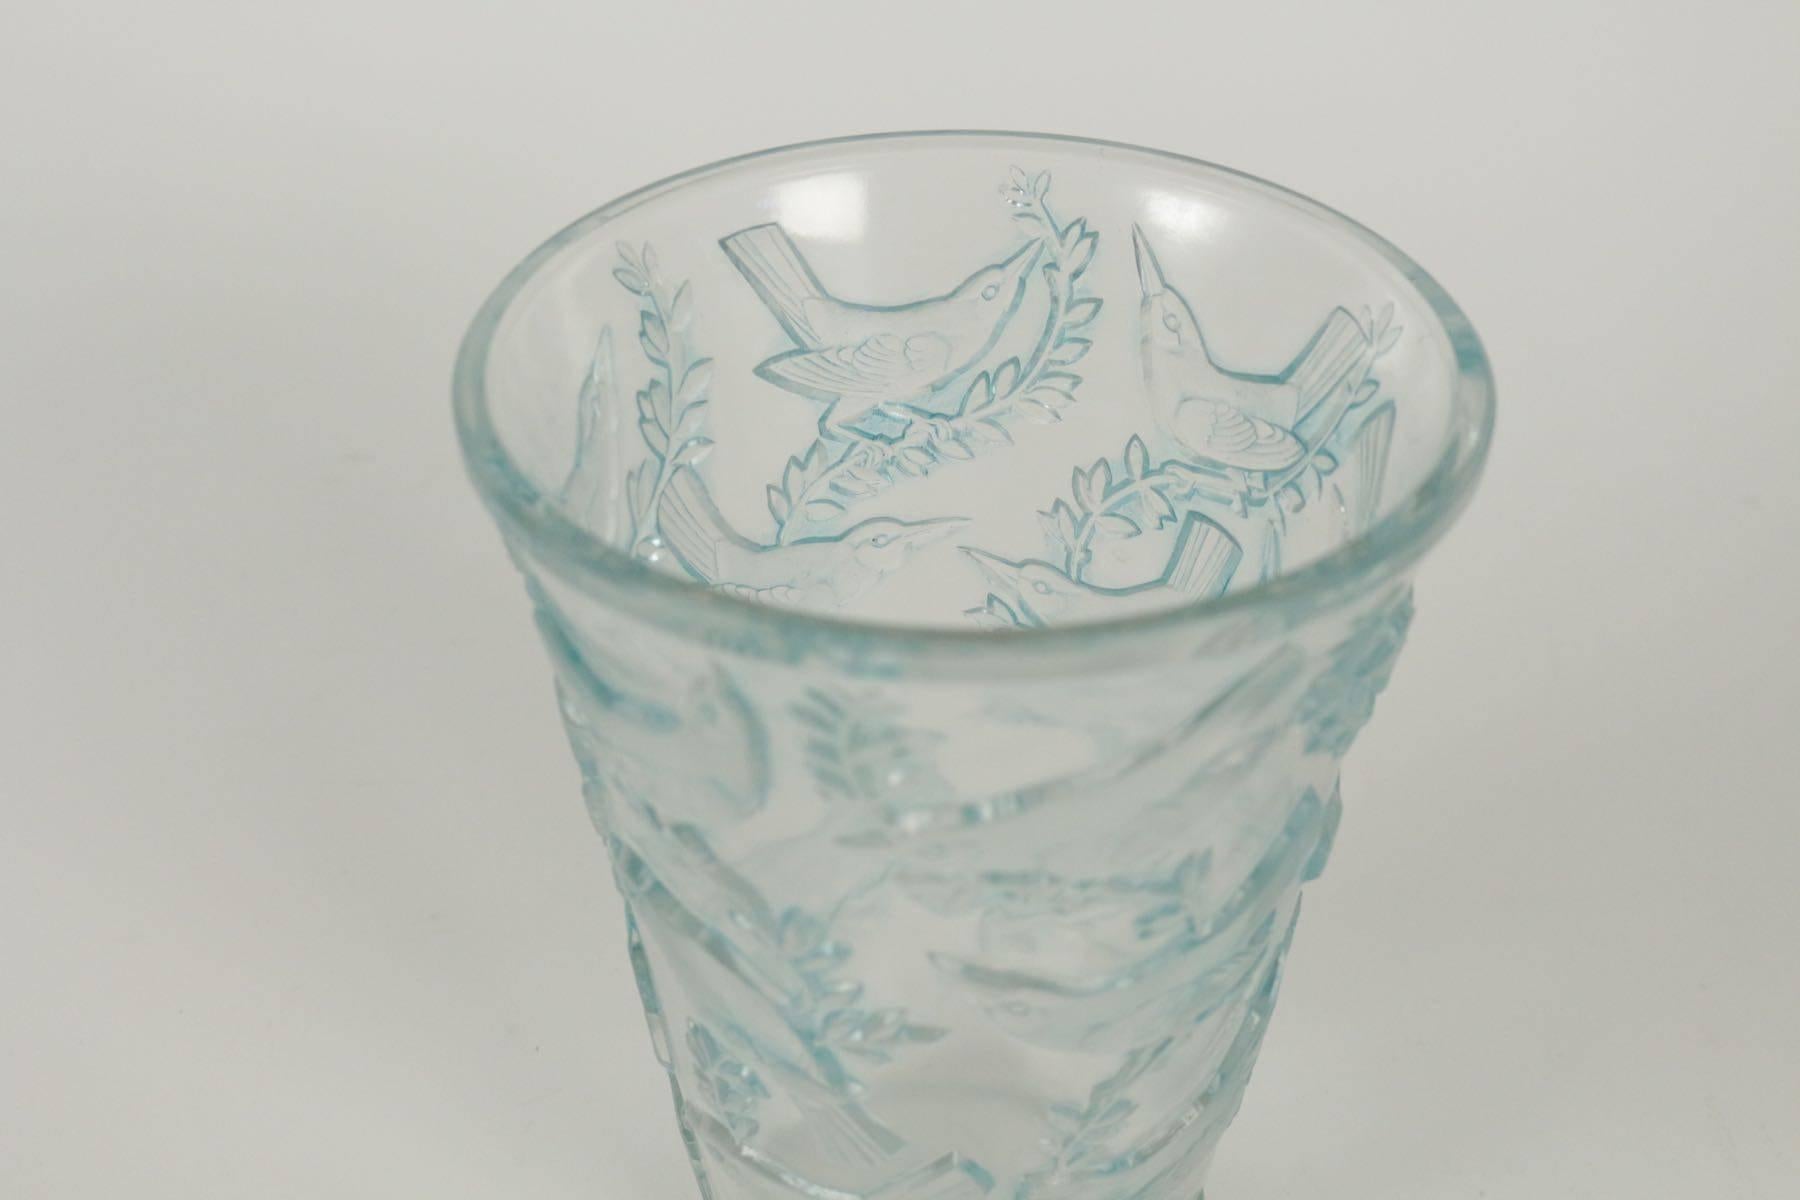 Clear pressed moulded glass vase and blue stained with frosted birds on branches all-around the exterior on the widening to rim form. This vase is impressed with birds resting upon branches vertically climbing the vase. The nicely detailed birds and